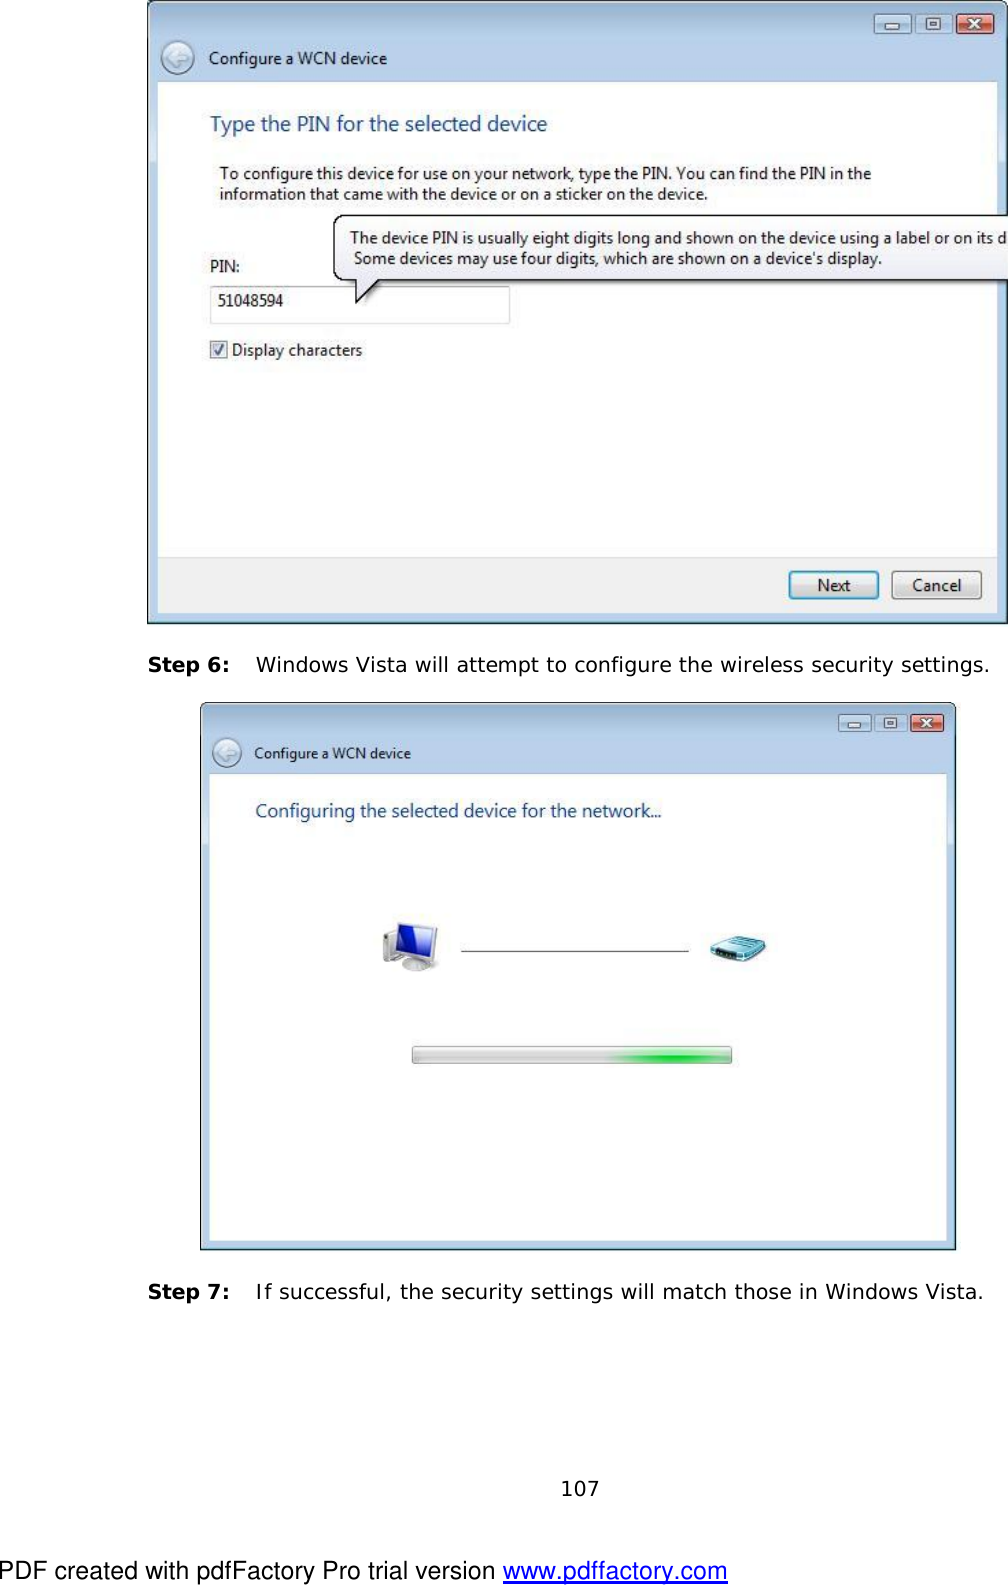  107    Step 6: Windows Vista will attempt to configure the wireless security settings.    Step 7:  If successful, the security settings will match those in Windows Vista. PDF created with pdfFactory Pro trial version www.pdffactory.com